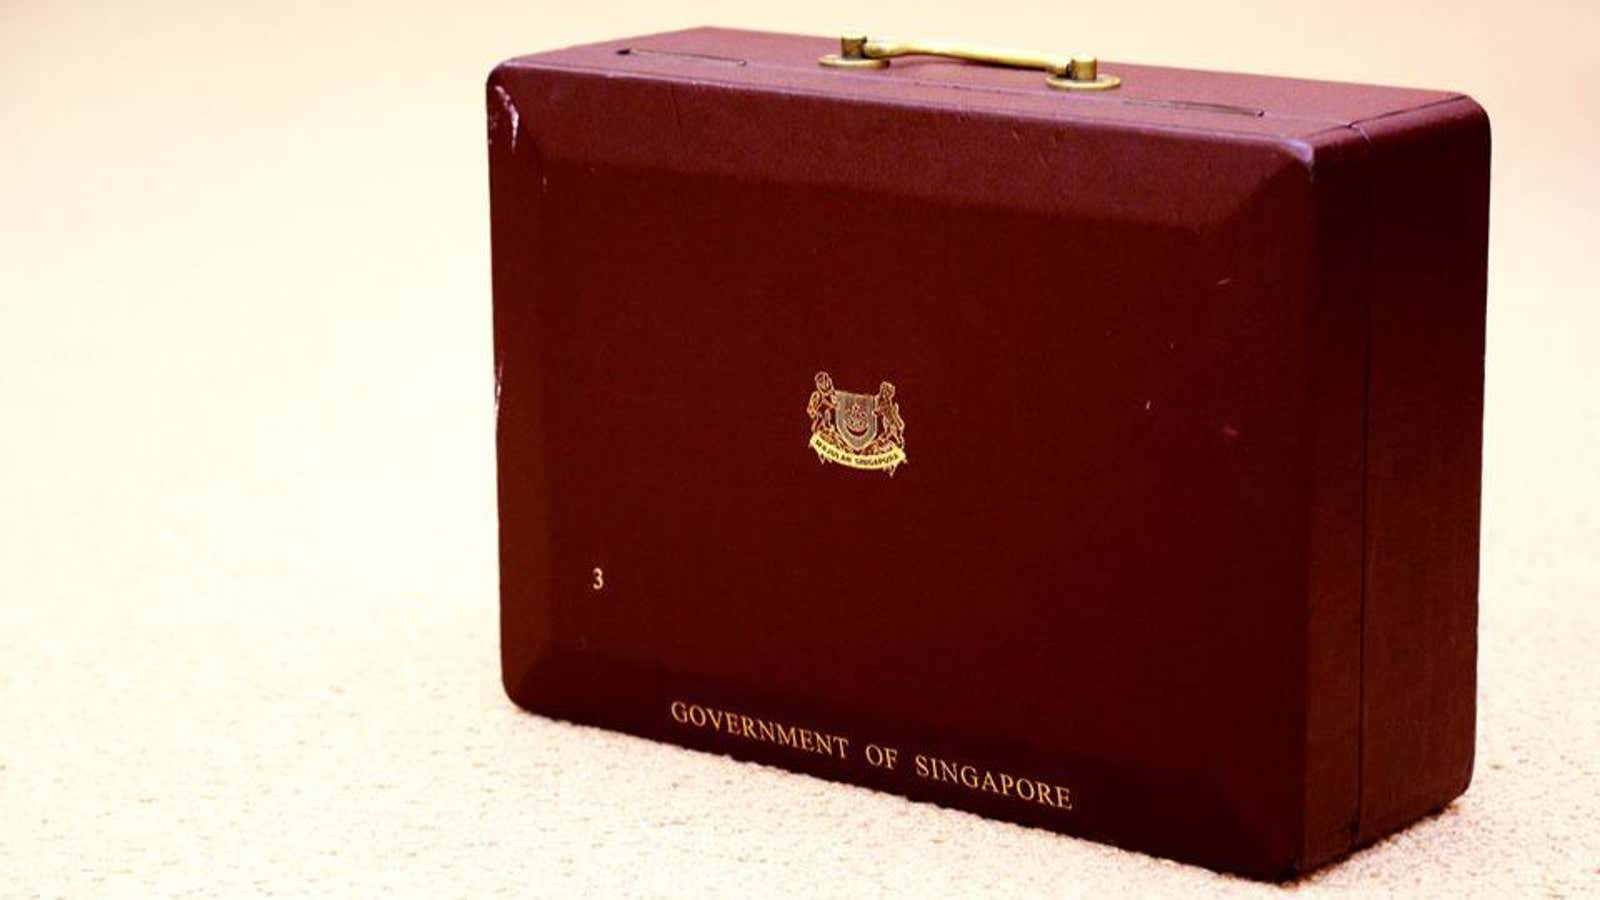 Lee Kuan Yew’s red box was a symbol of his dedication to Singapore.